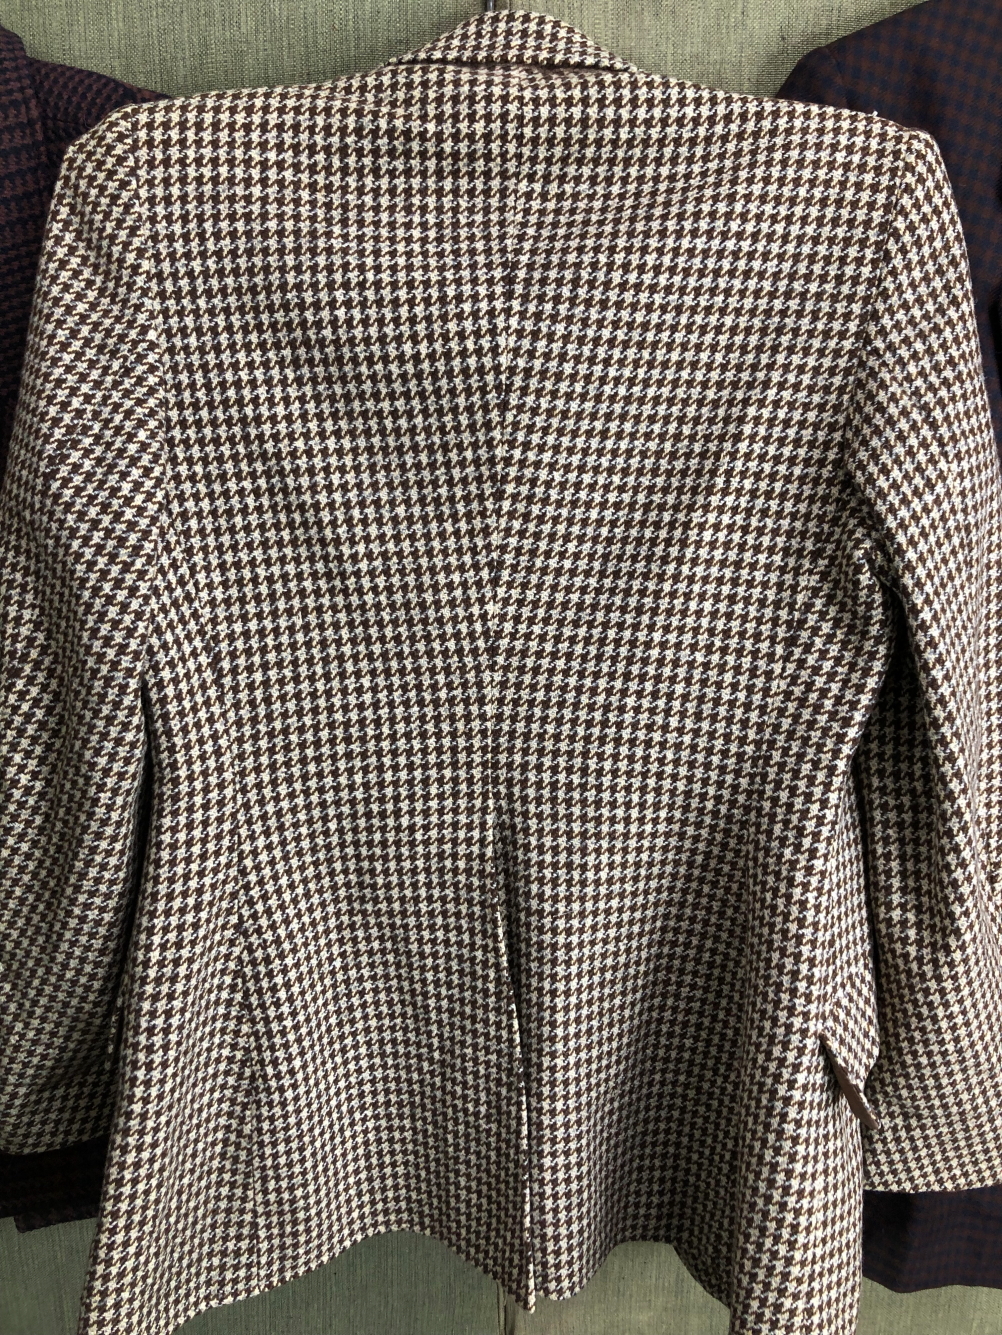 JACKET. HARRY HALL, MADE IN ENGLAND 100% WOOL AND LINED CHECK JACKET PIT TO PIT 43cms, SHOULDER TO - Image 4 of 11